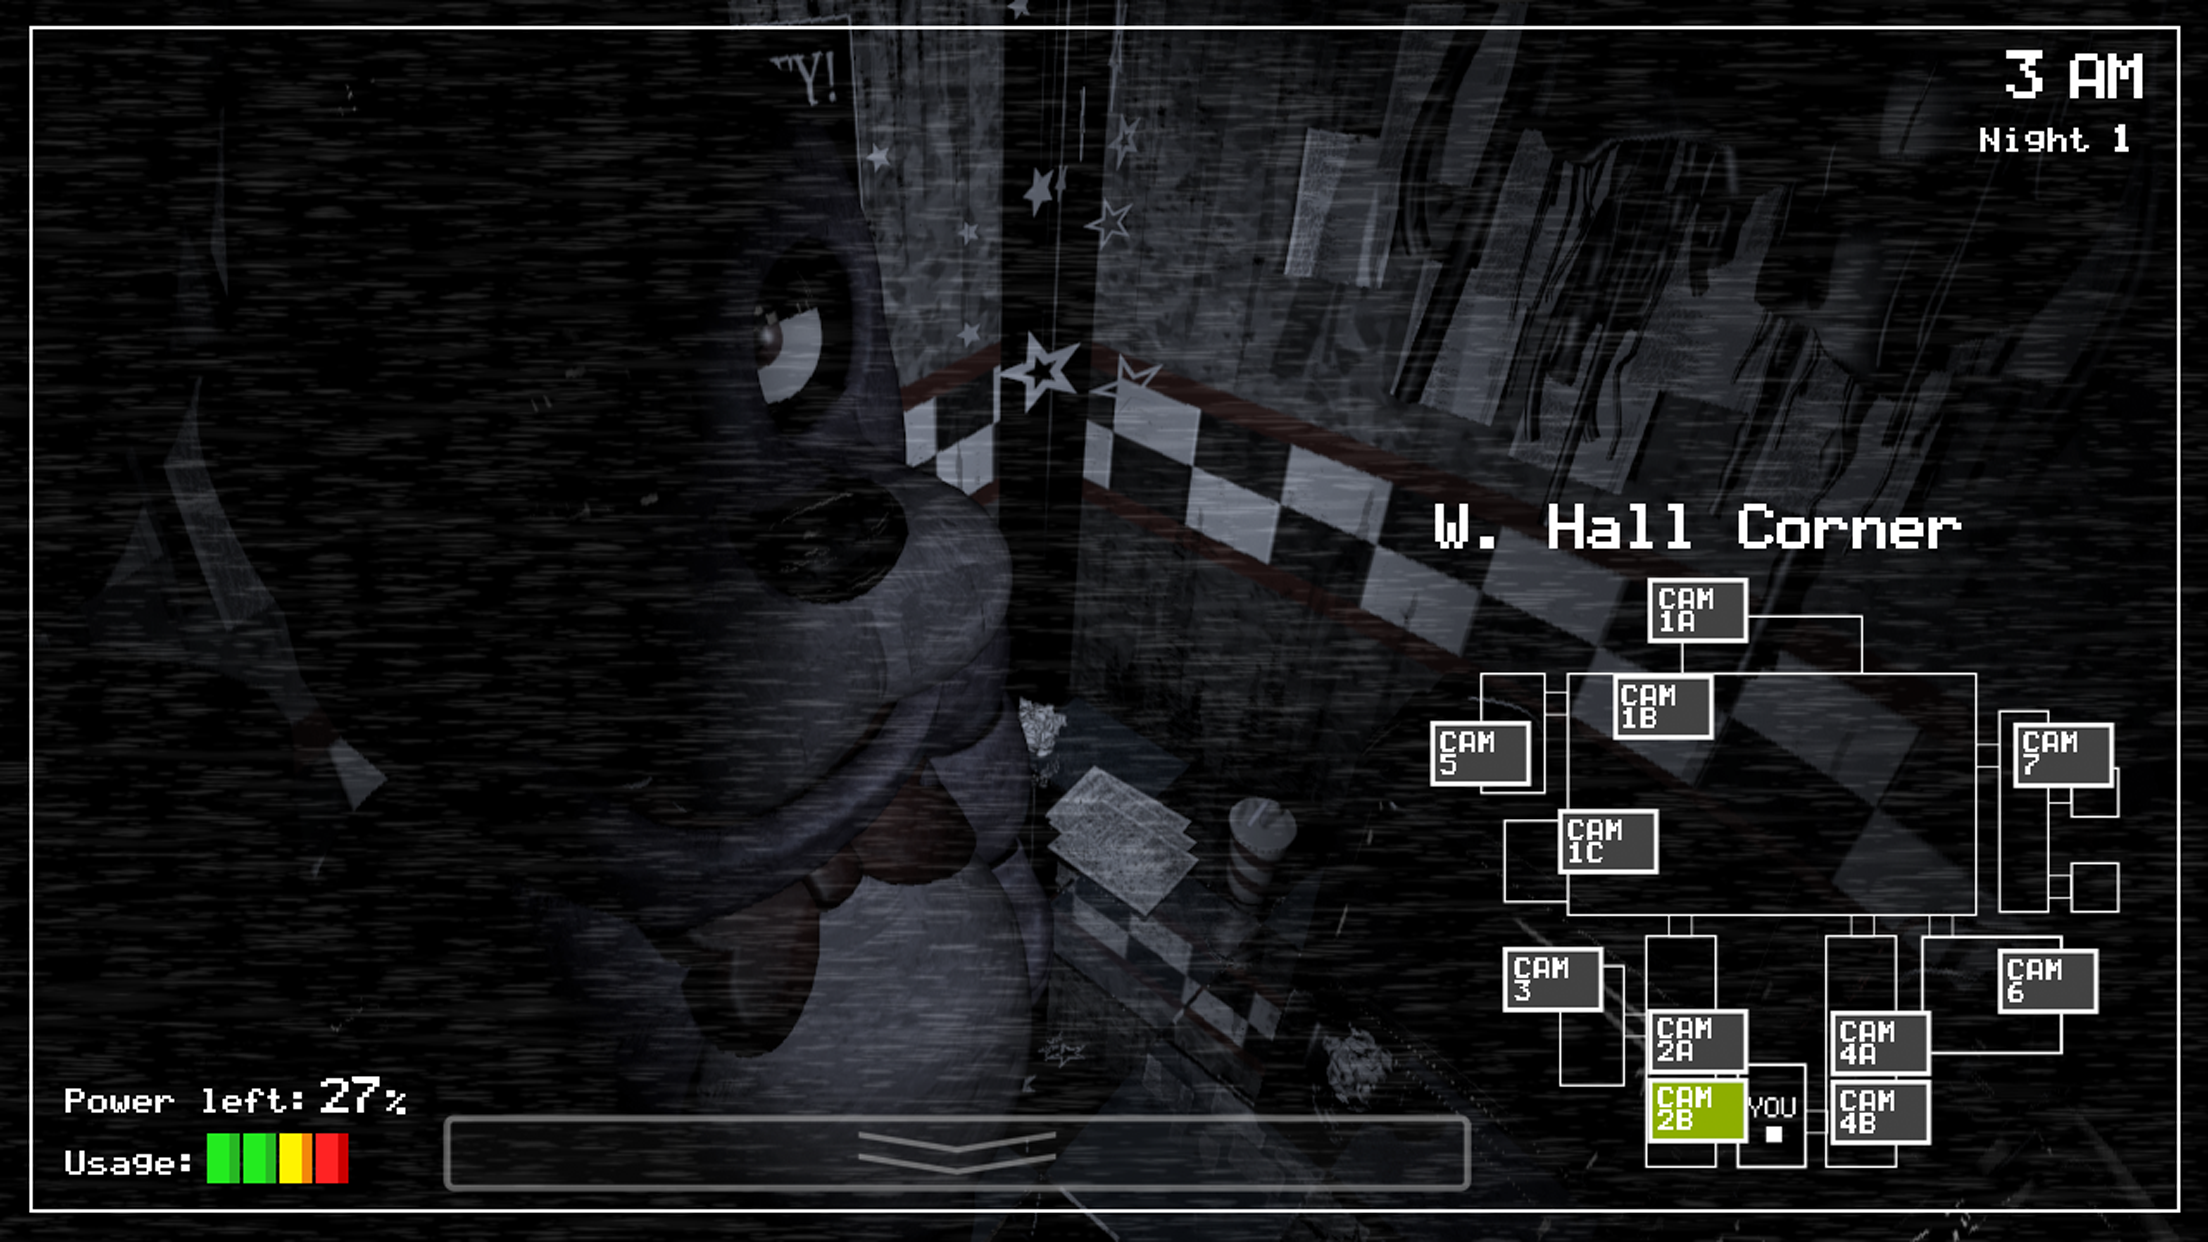 Five Nights at Freddy's 3: download for PC / Android (APK)